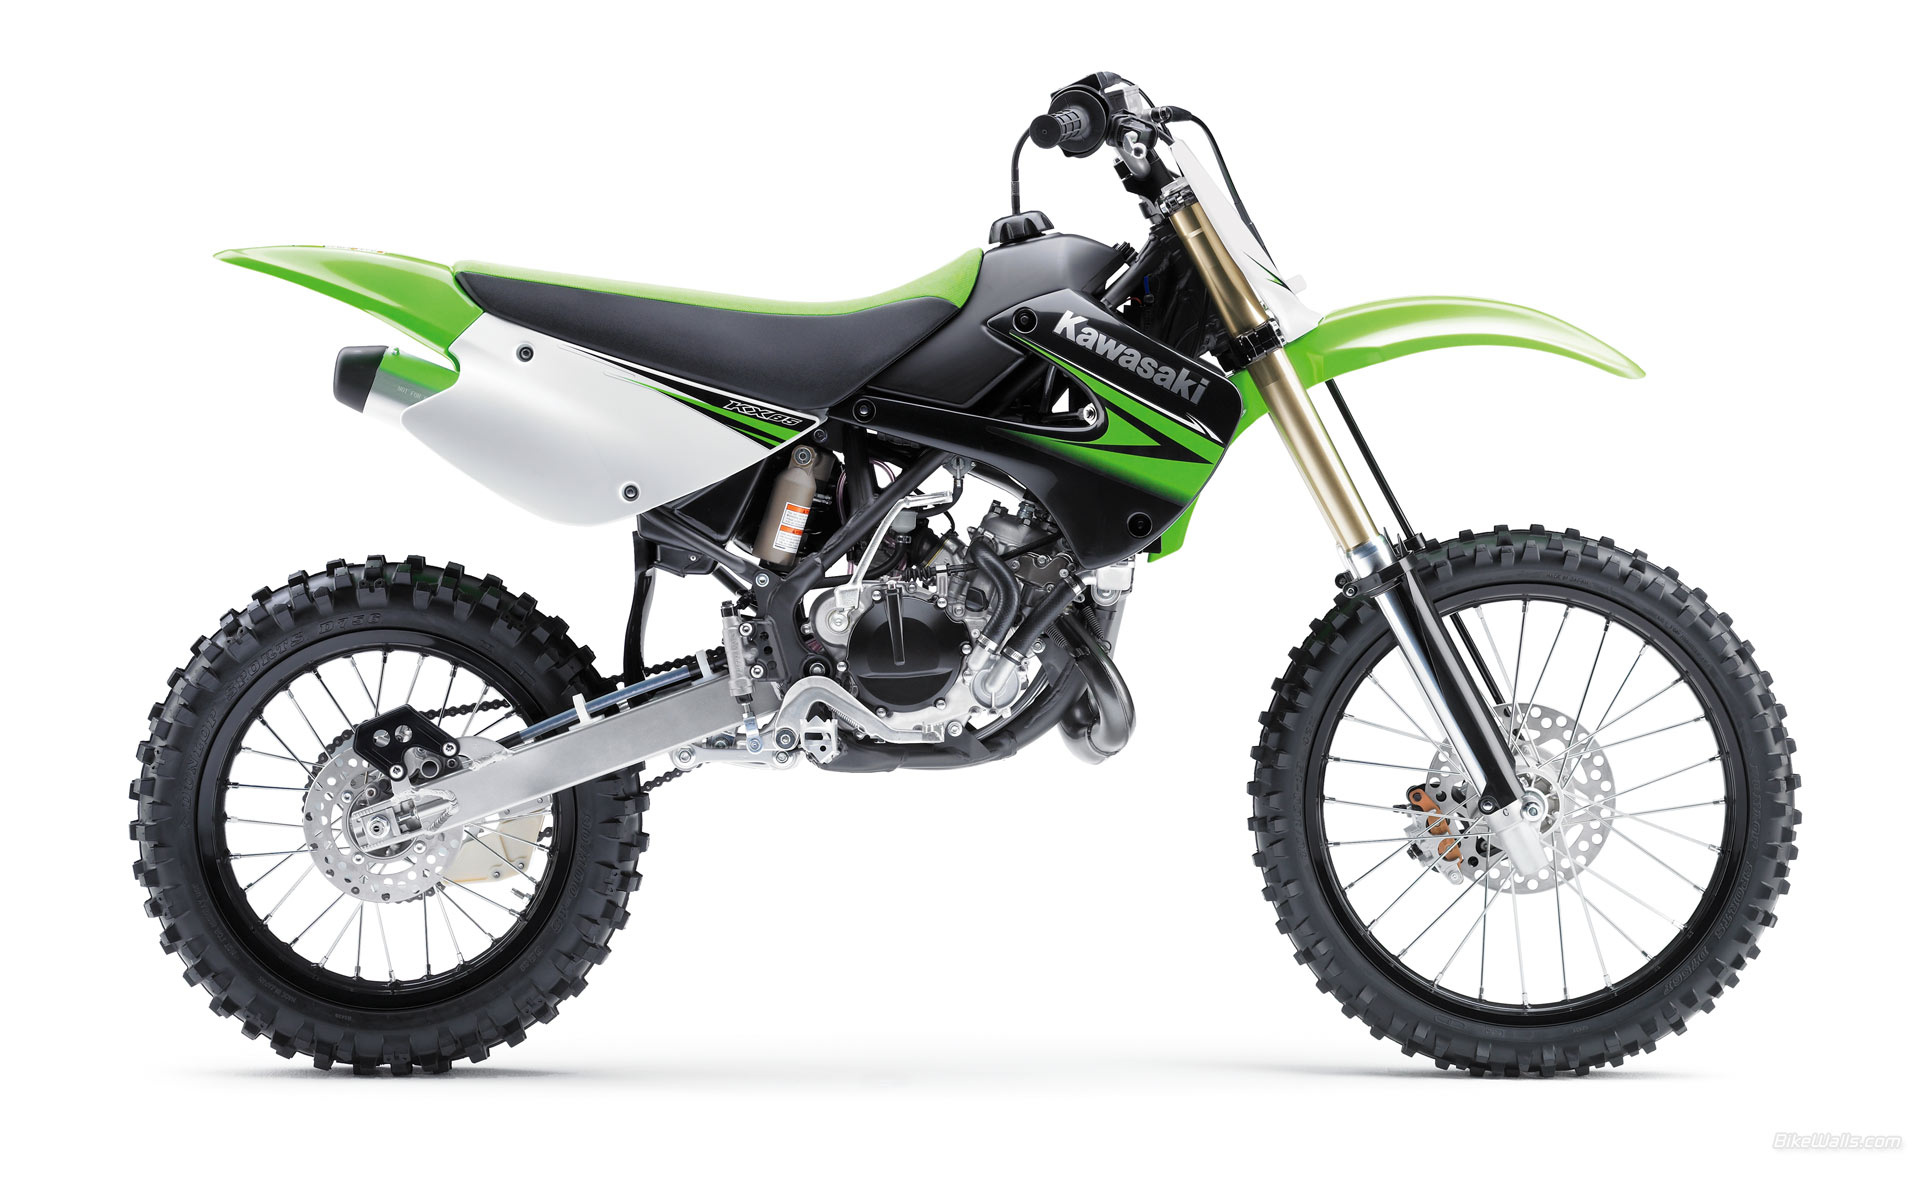 Kawasaki KX85, Off-road motorcycle, Power and precision, Adrenaline-fueled excitement, 1920x1200 HD Desktop